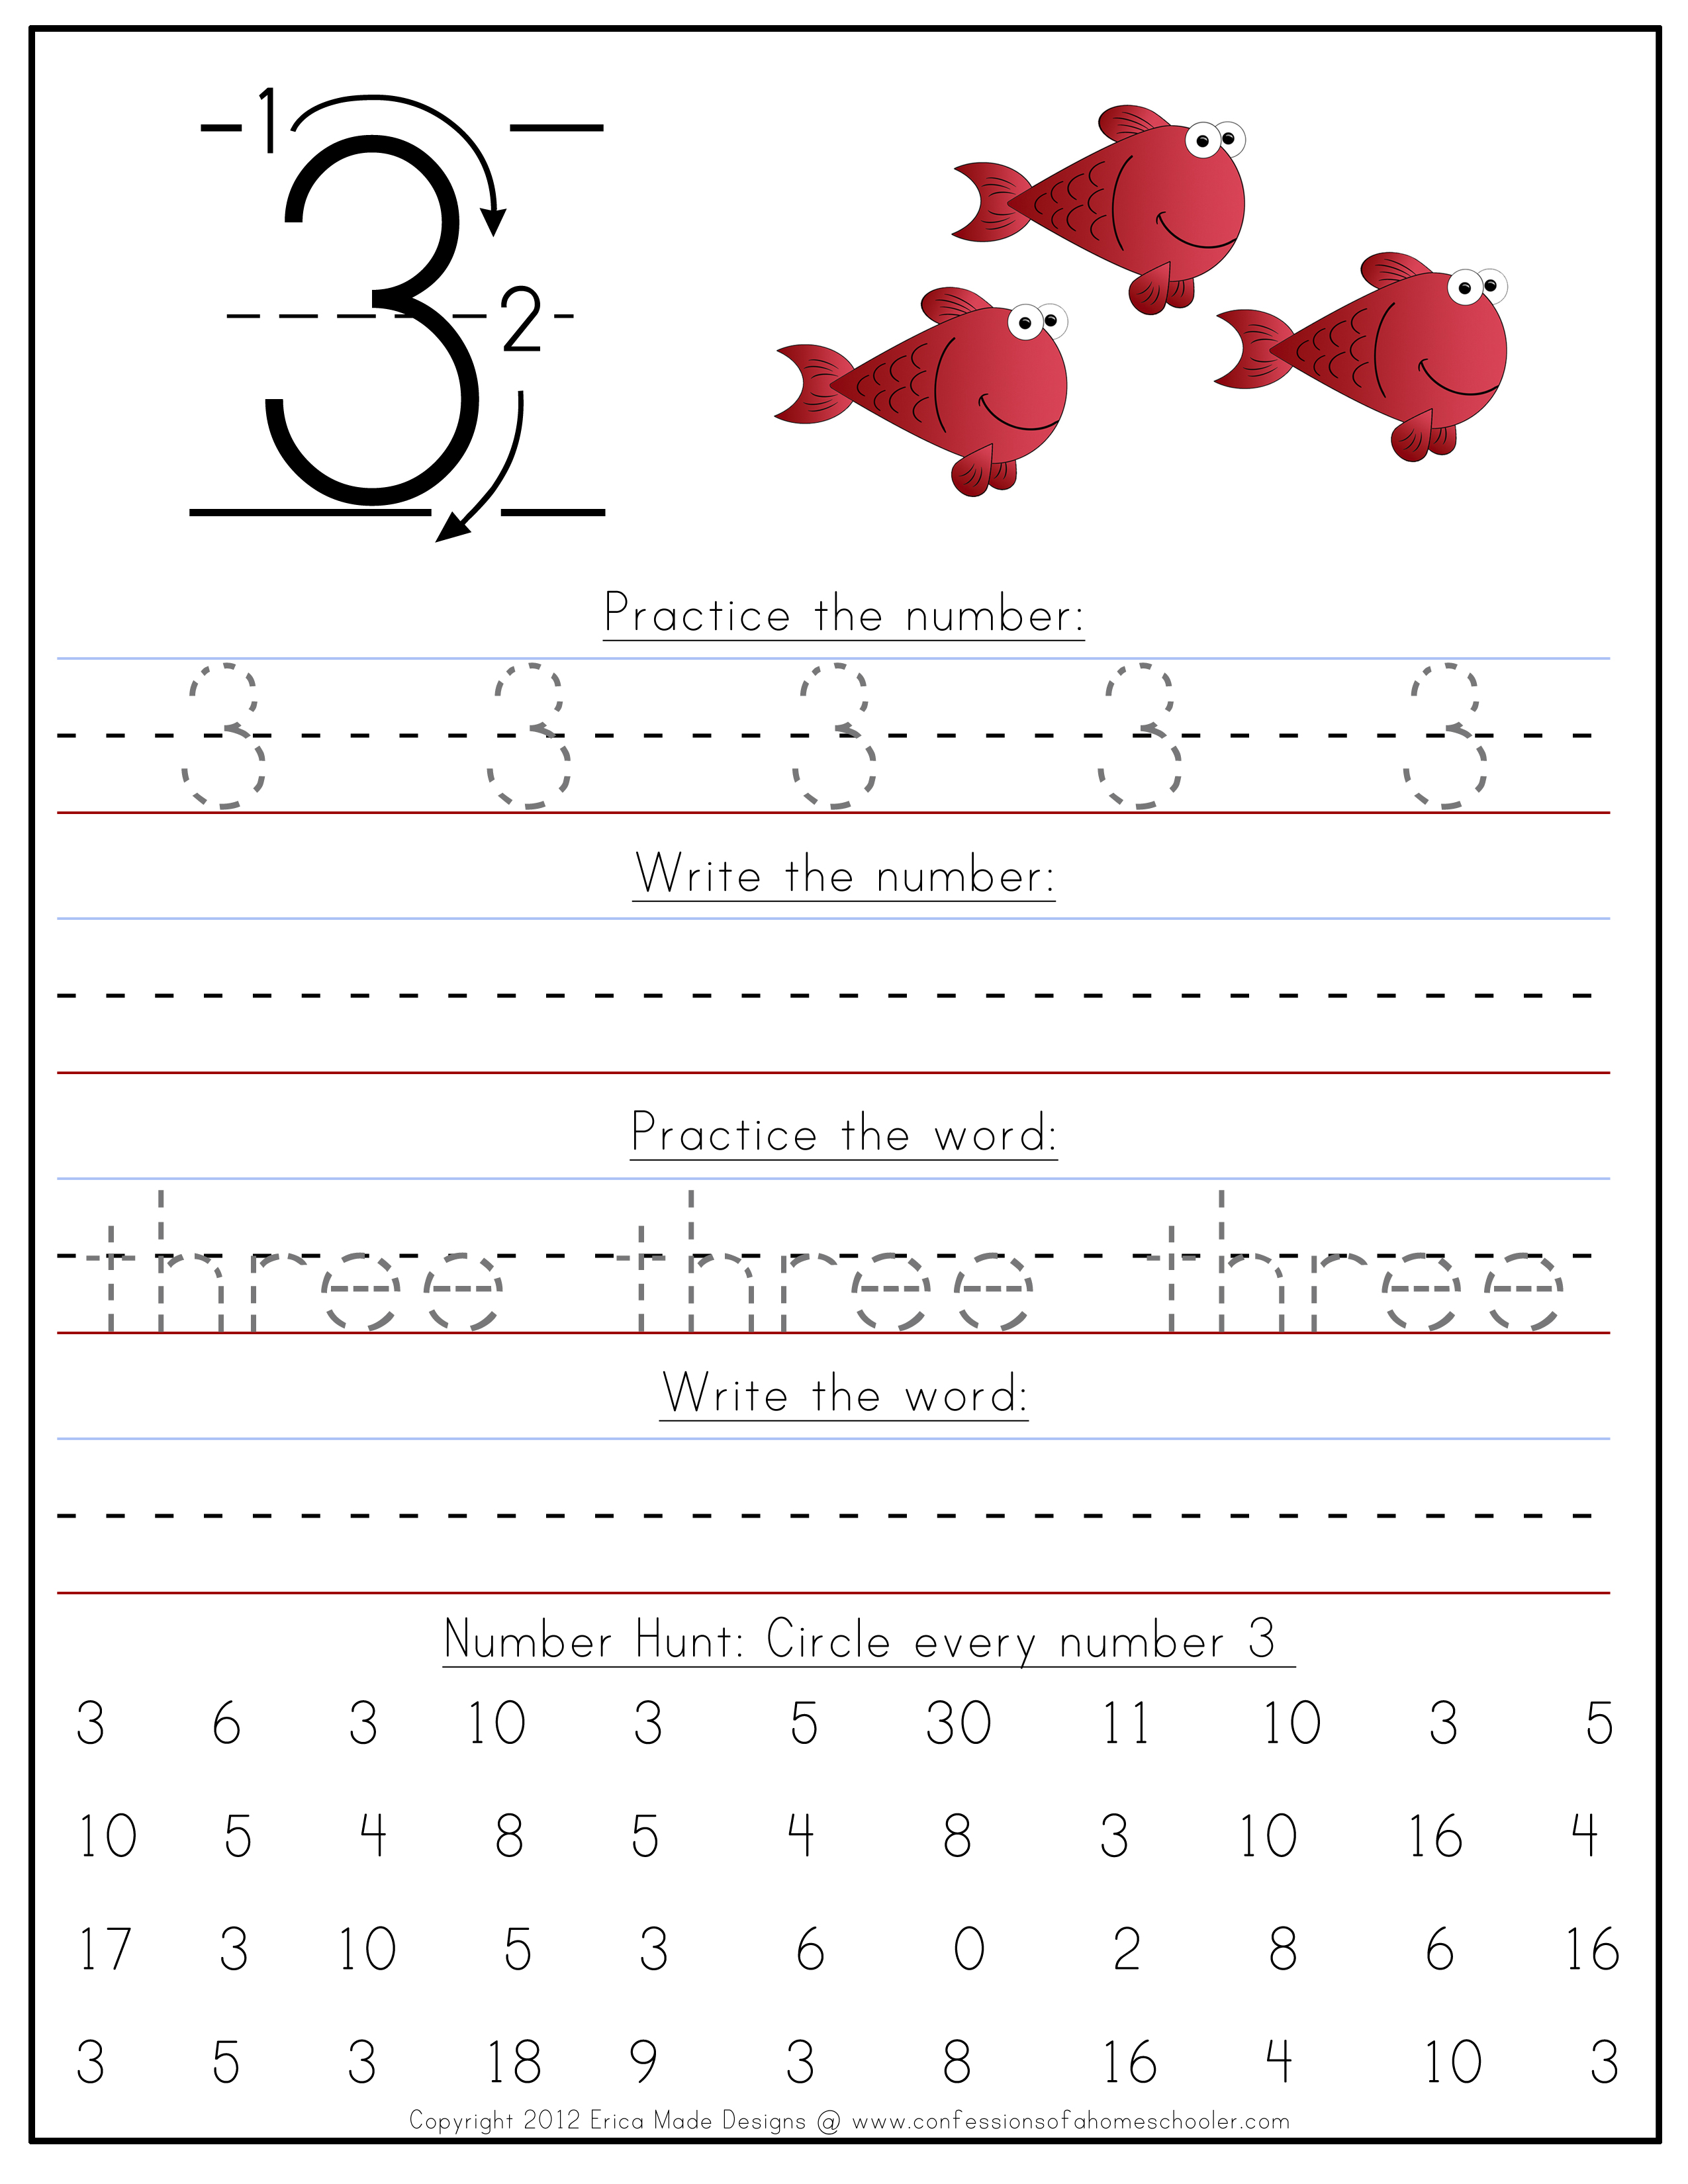 writing-sentences-worksheets-for-2nd-grade-pdf-practice-cleo-sheets